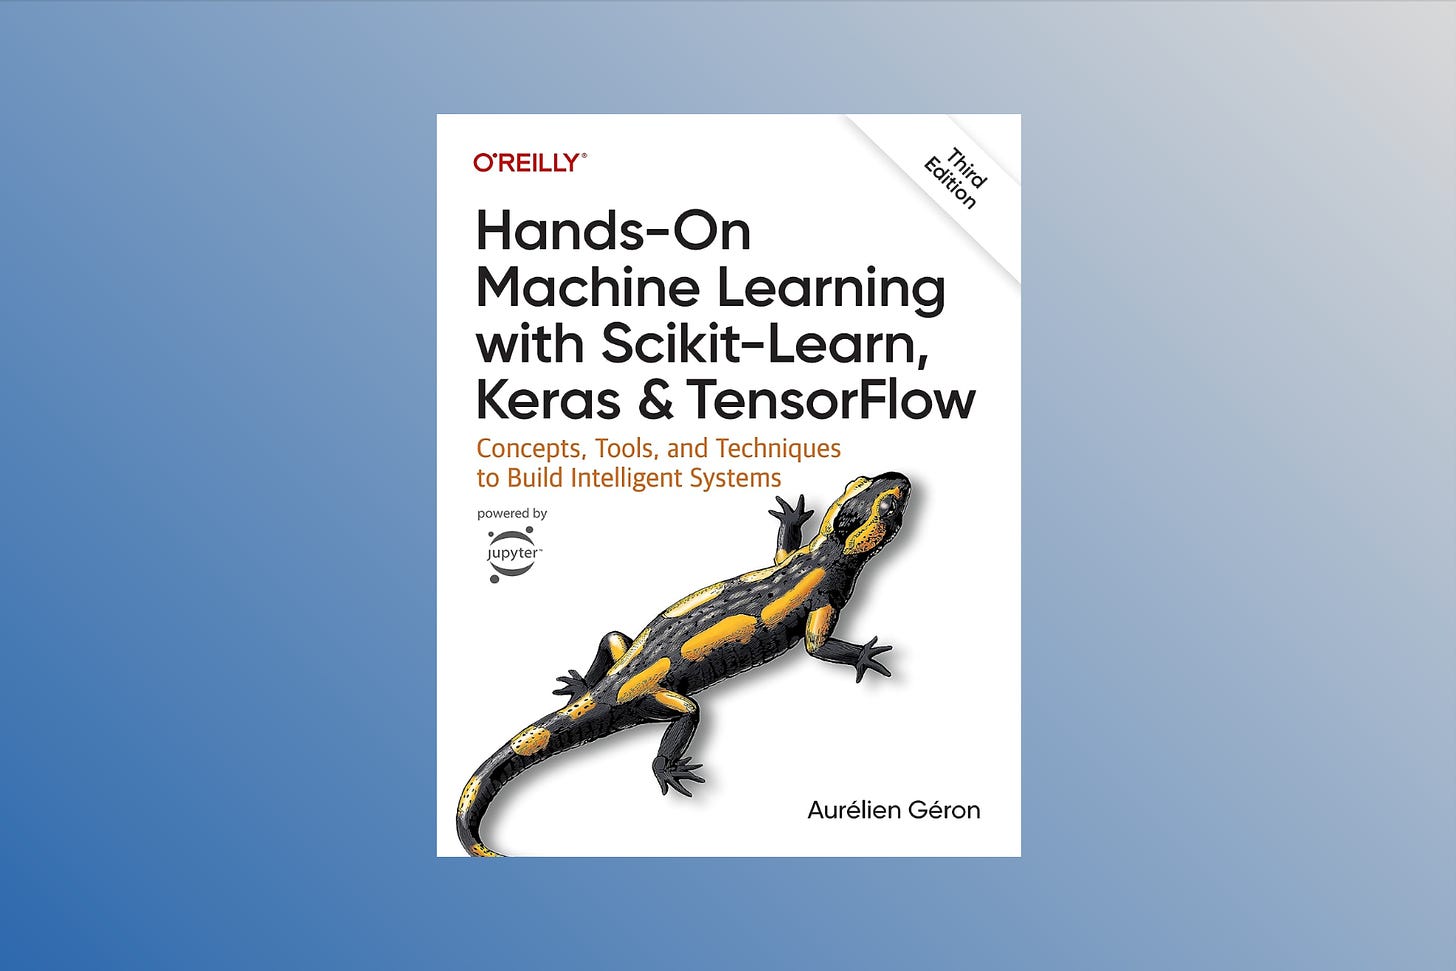 Hands-On Machine Learning with Scikit-Learn, Keras, and TensorFlow: Concepts, Tools, and Techniques to Build Intelligent Systems*